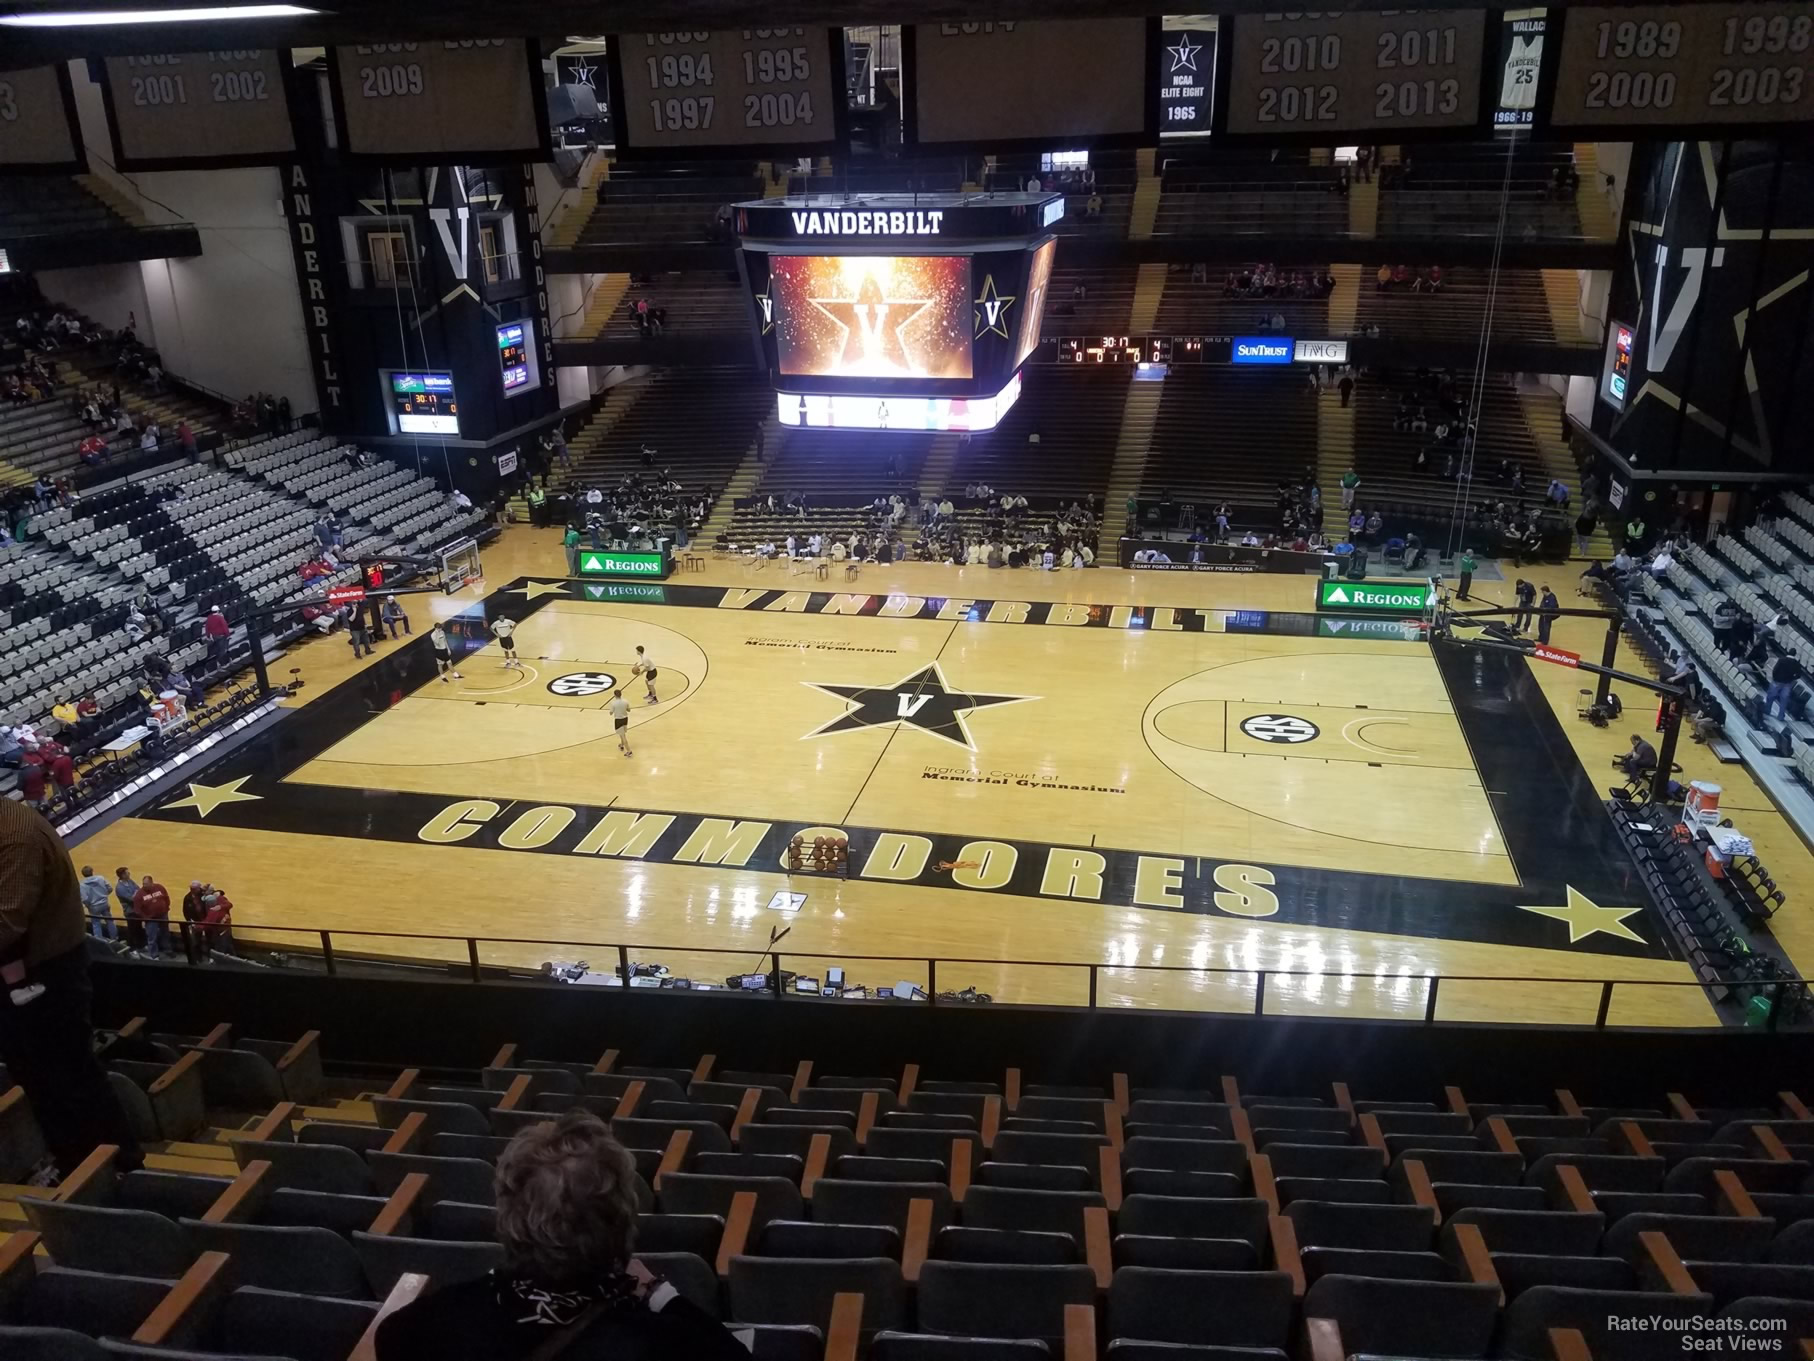 section 3b, row 7 seat view  - memorial gymnasium